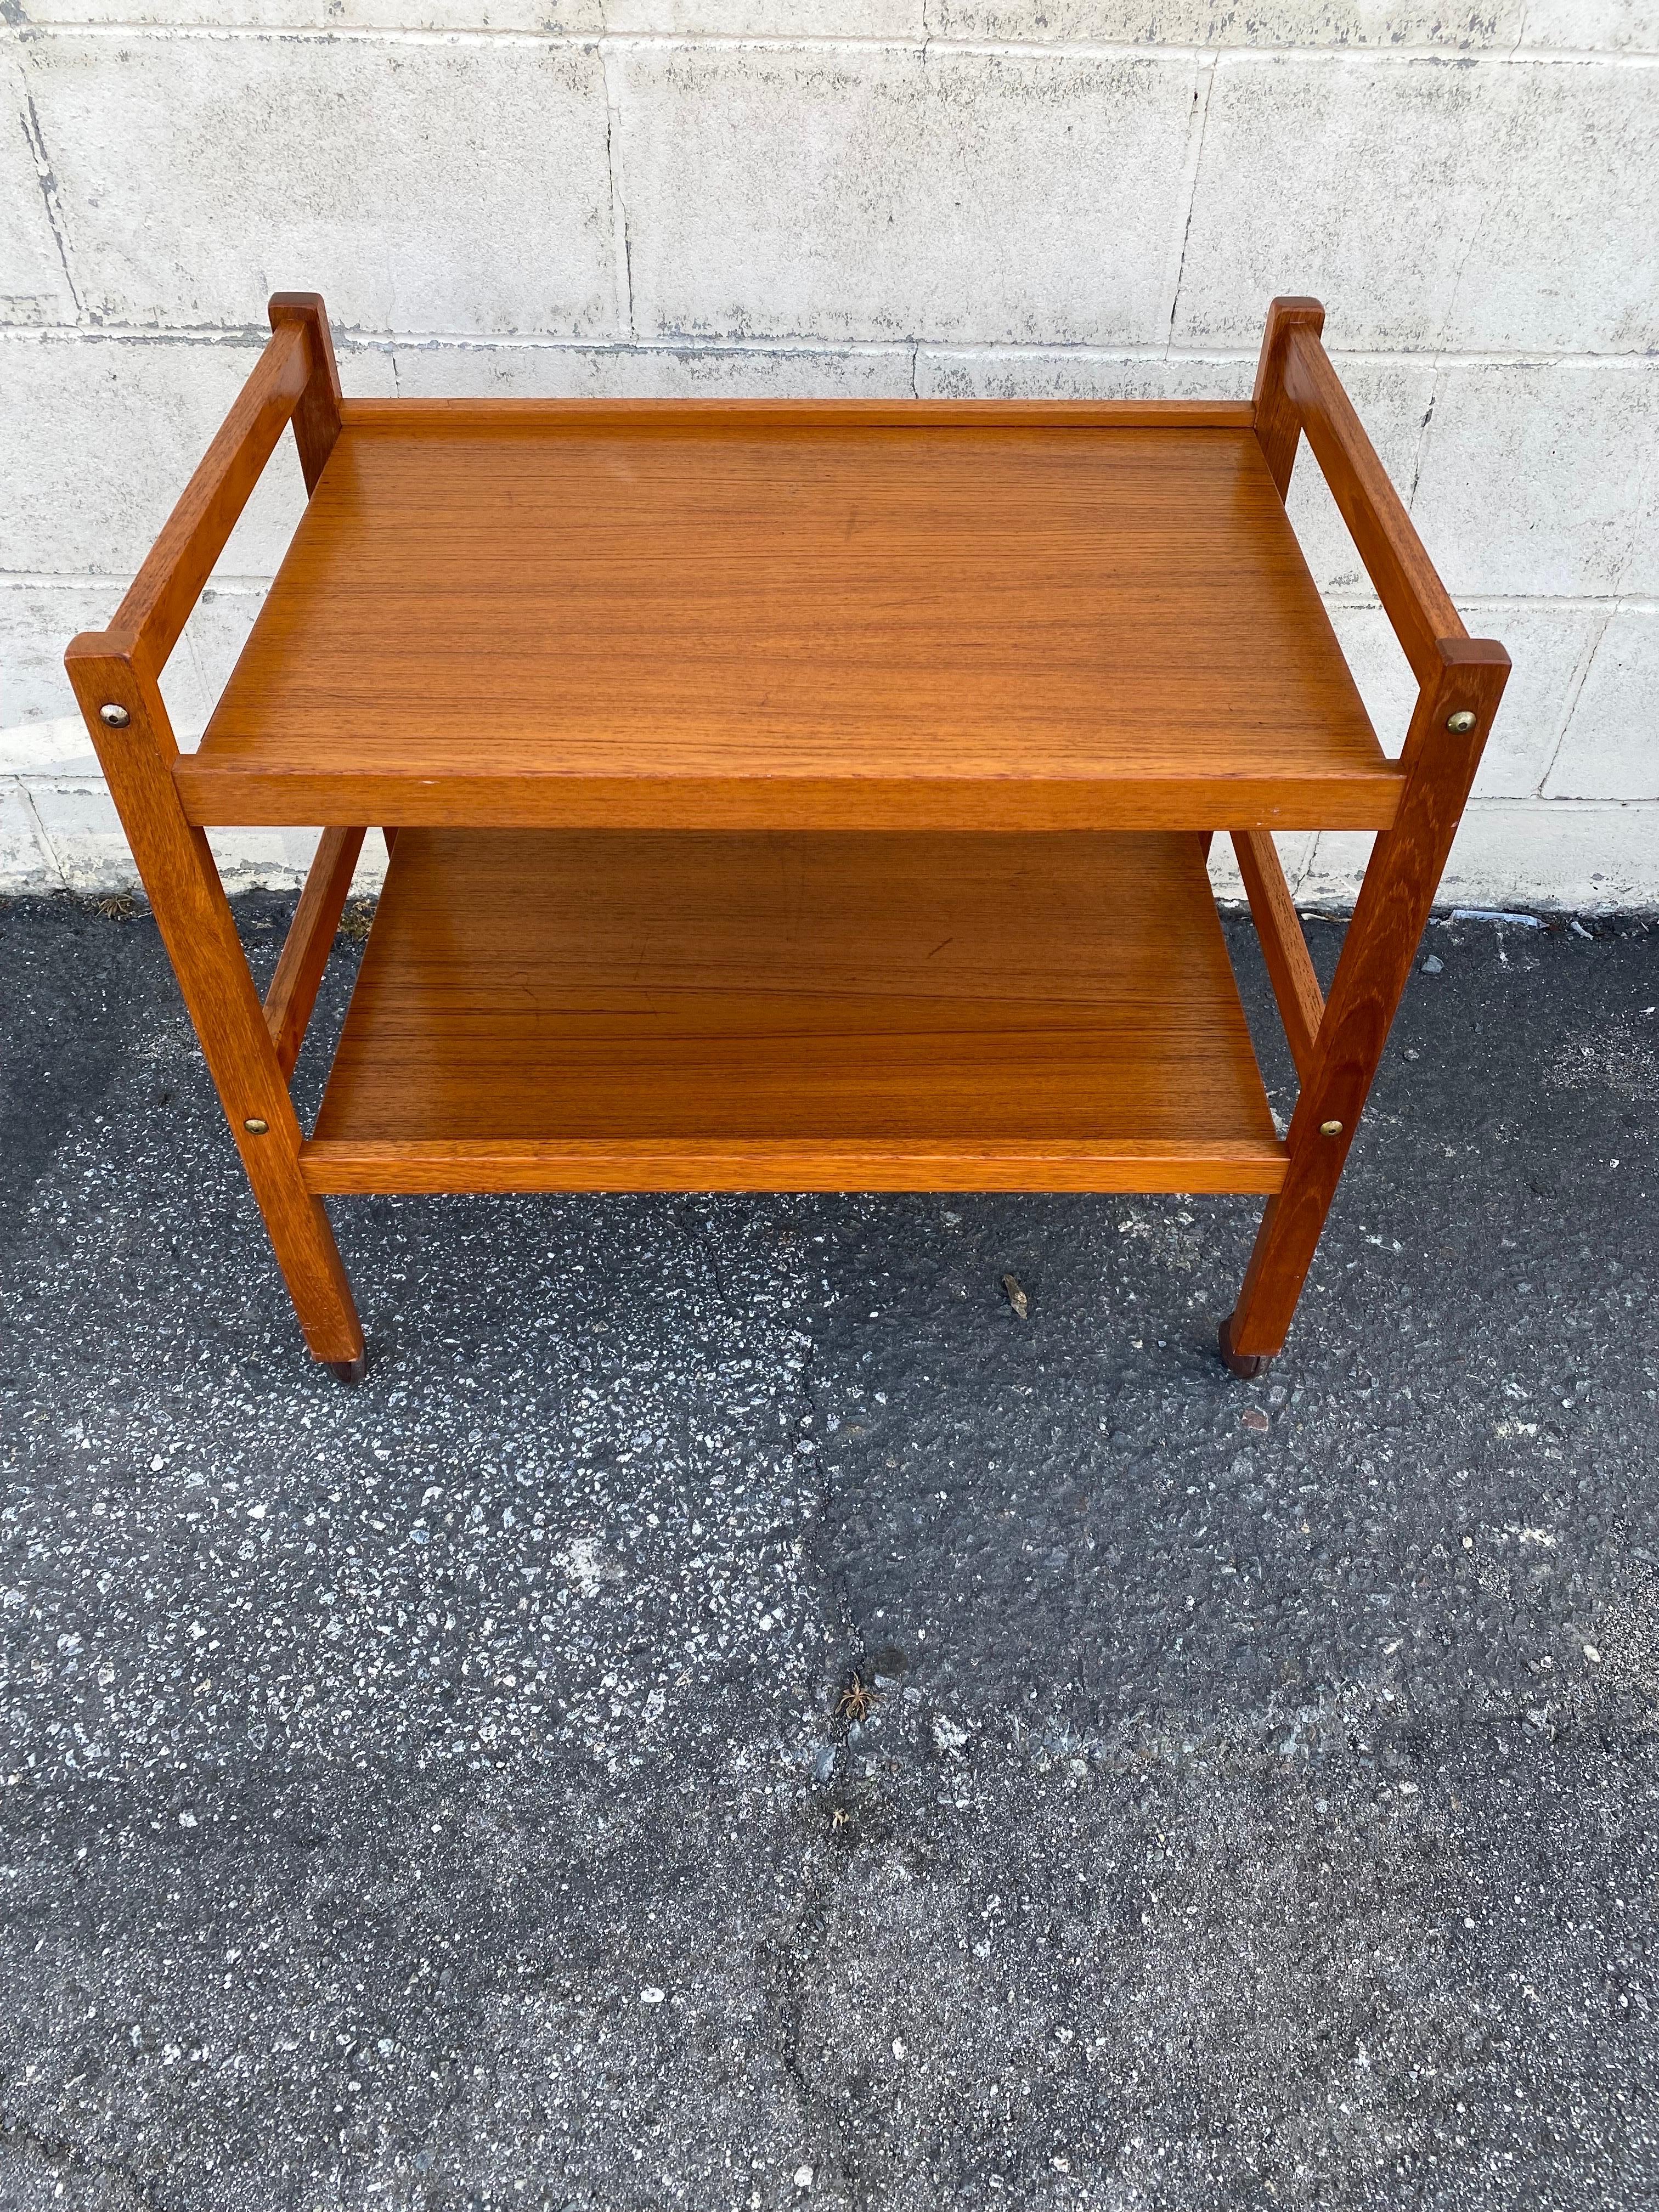 For sale we have a beautiful teak bar cart or tea cart made in Denmark by Brdr. Furbo. 

This 2 tiered, Danish Mid-Century Modern Bar cart is in excellent structural shape and very good cosmetic shape. This teak bar cart comes with age appropriate